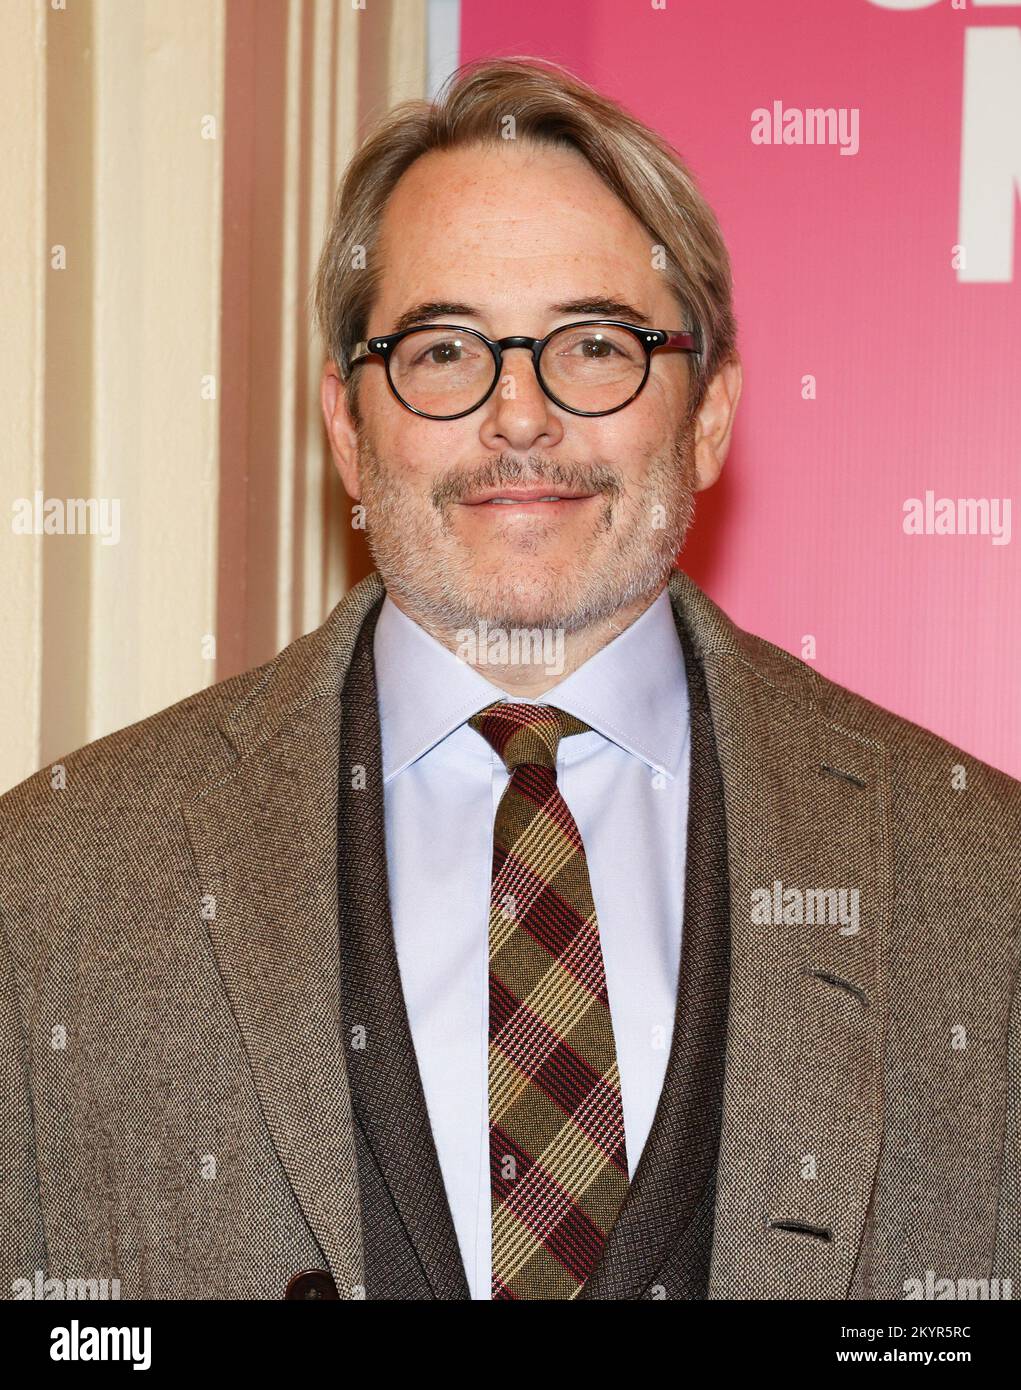 New York, NY, USA. 1st Dec, 2022. Matthew Broderick at arrivals for AIN'T NO MO' Opening Night on Broadway, Belasco Theatre, New York, NY December 1, 2022. Credit: CJ Rivera/Everett Collection/Alamy Live News Stock Photo